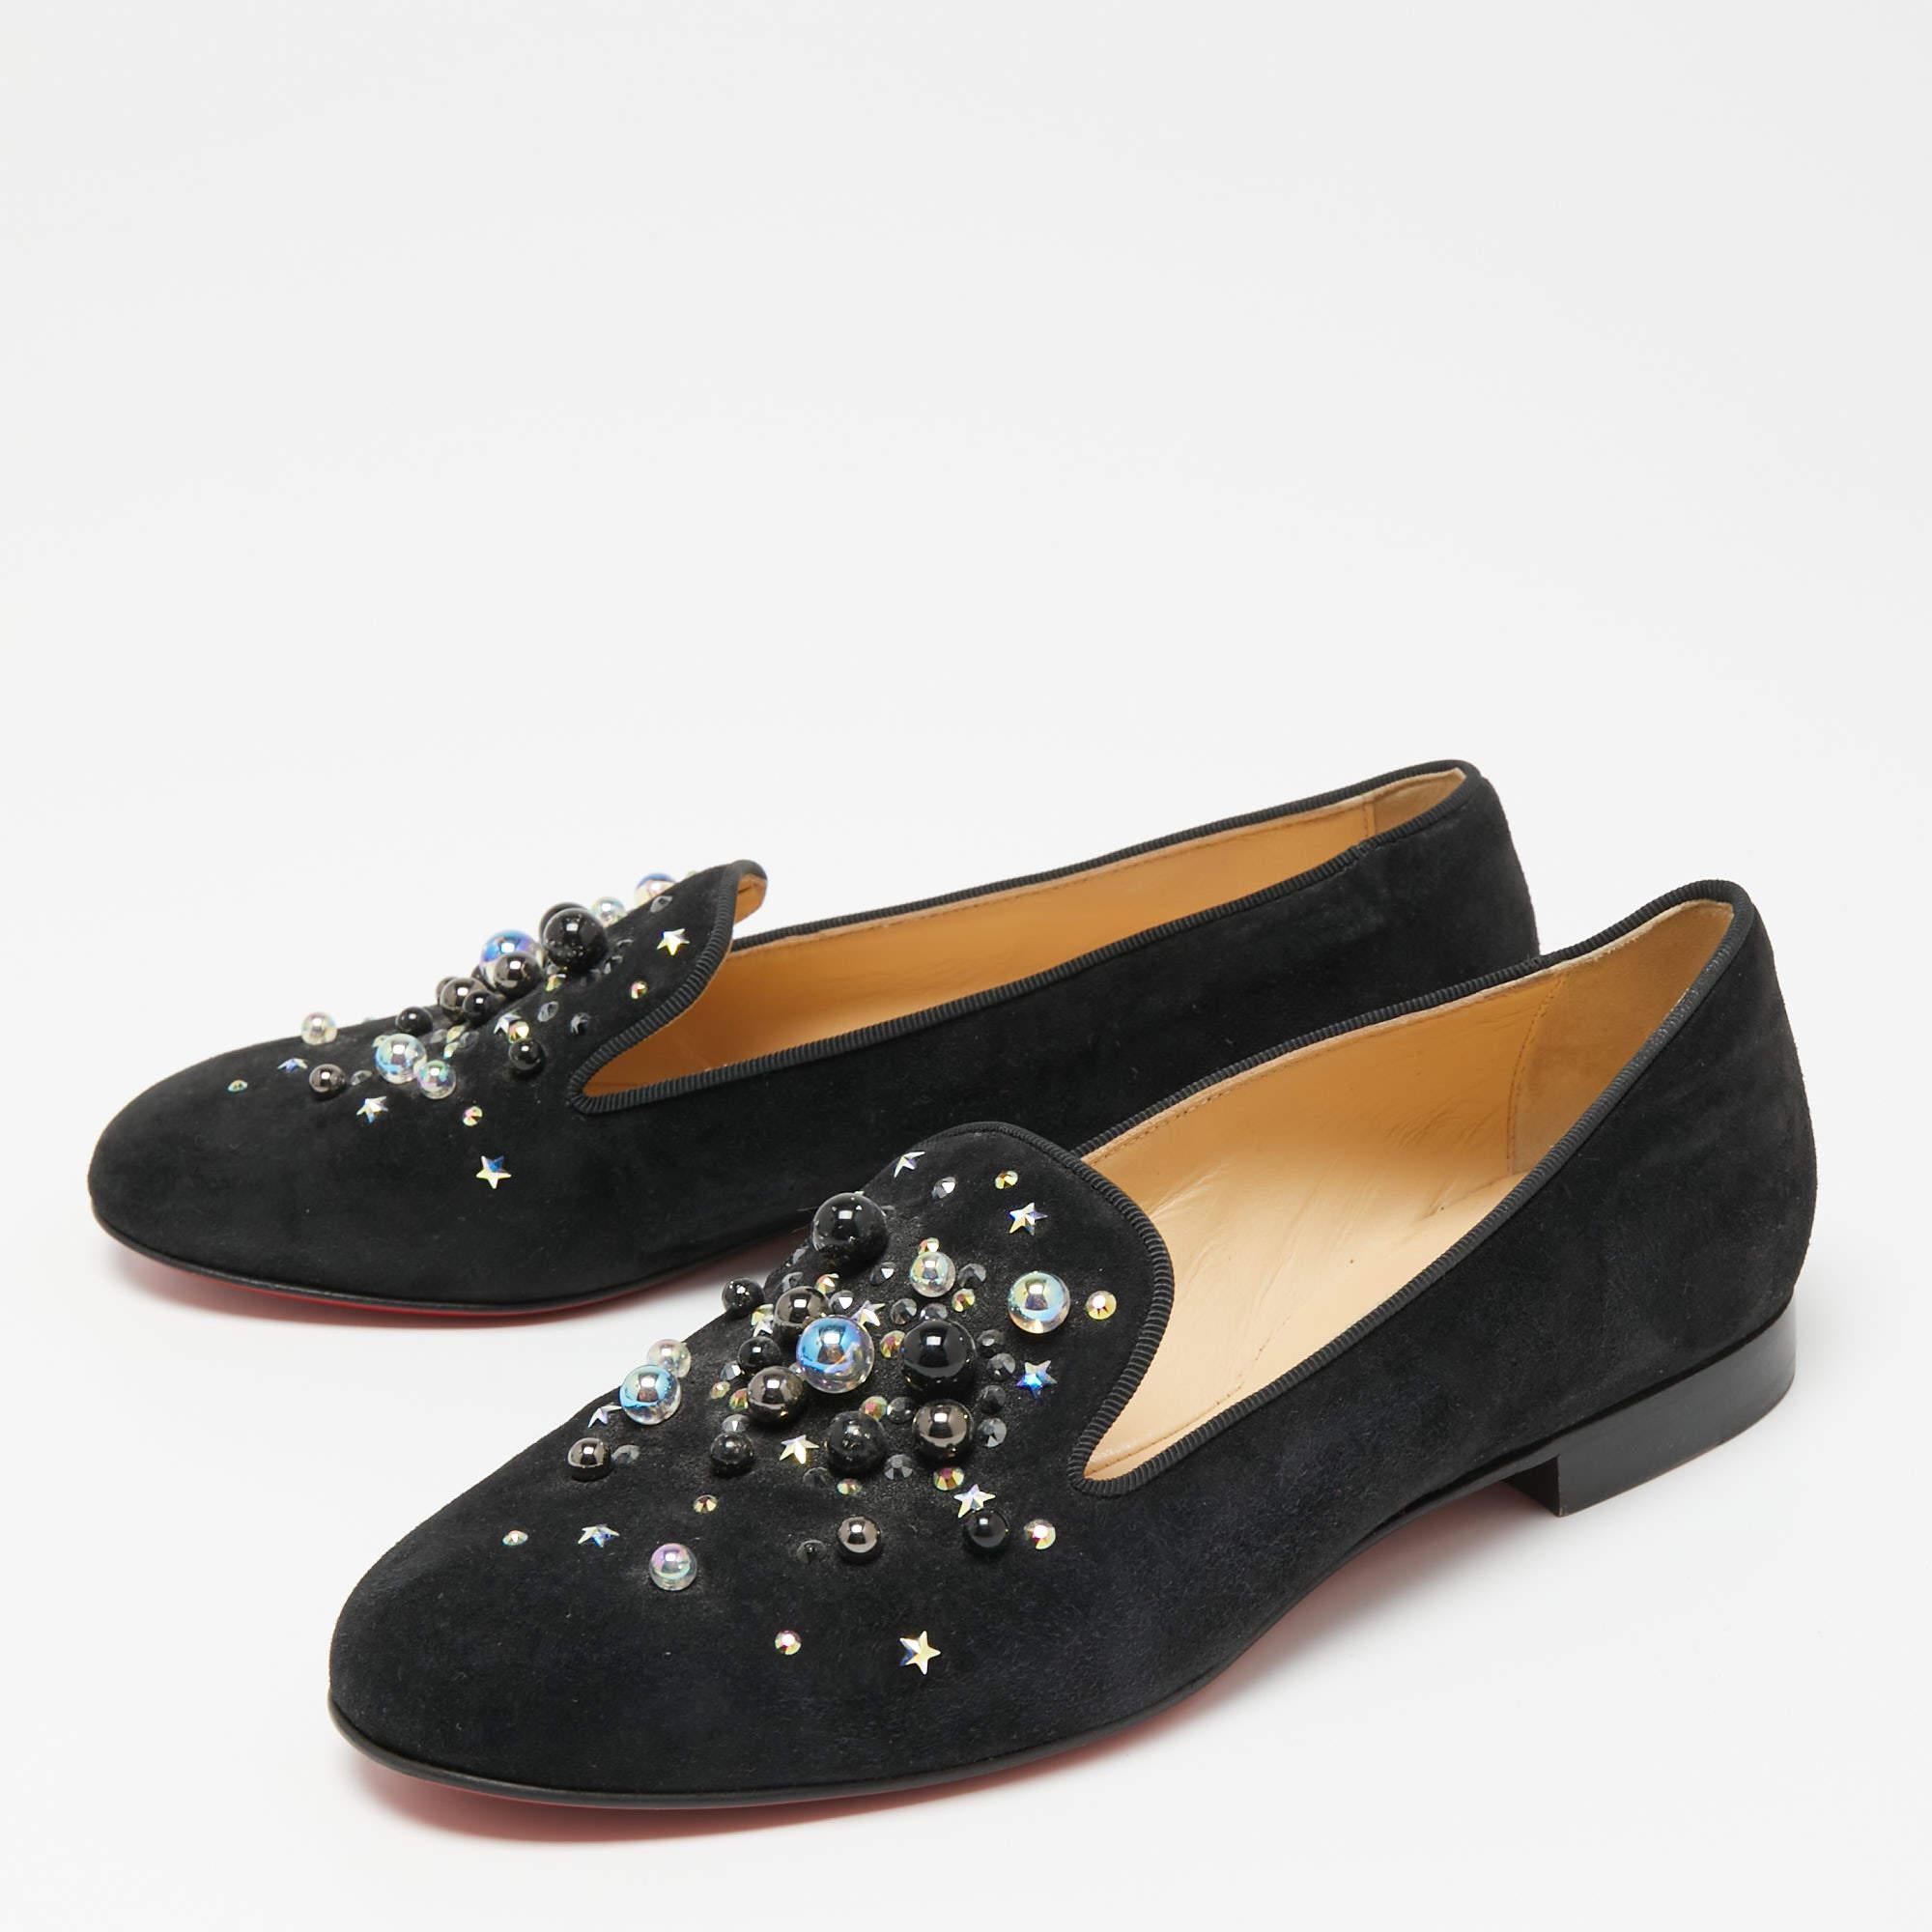 Women's Christian Louboutin Black Suede Candy Studded Smoking Slippers Size 36